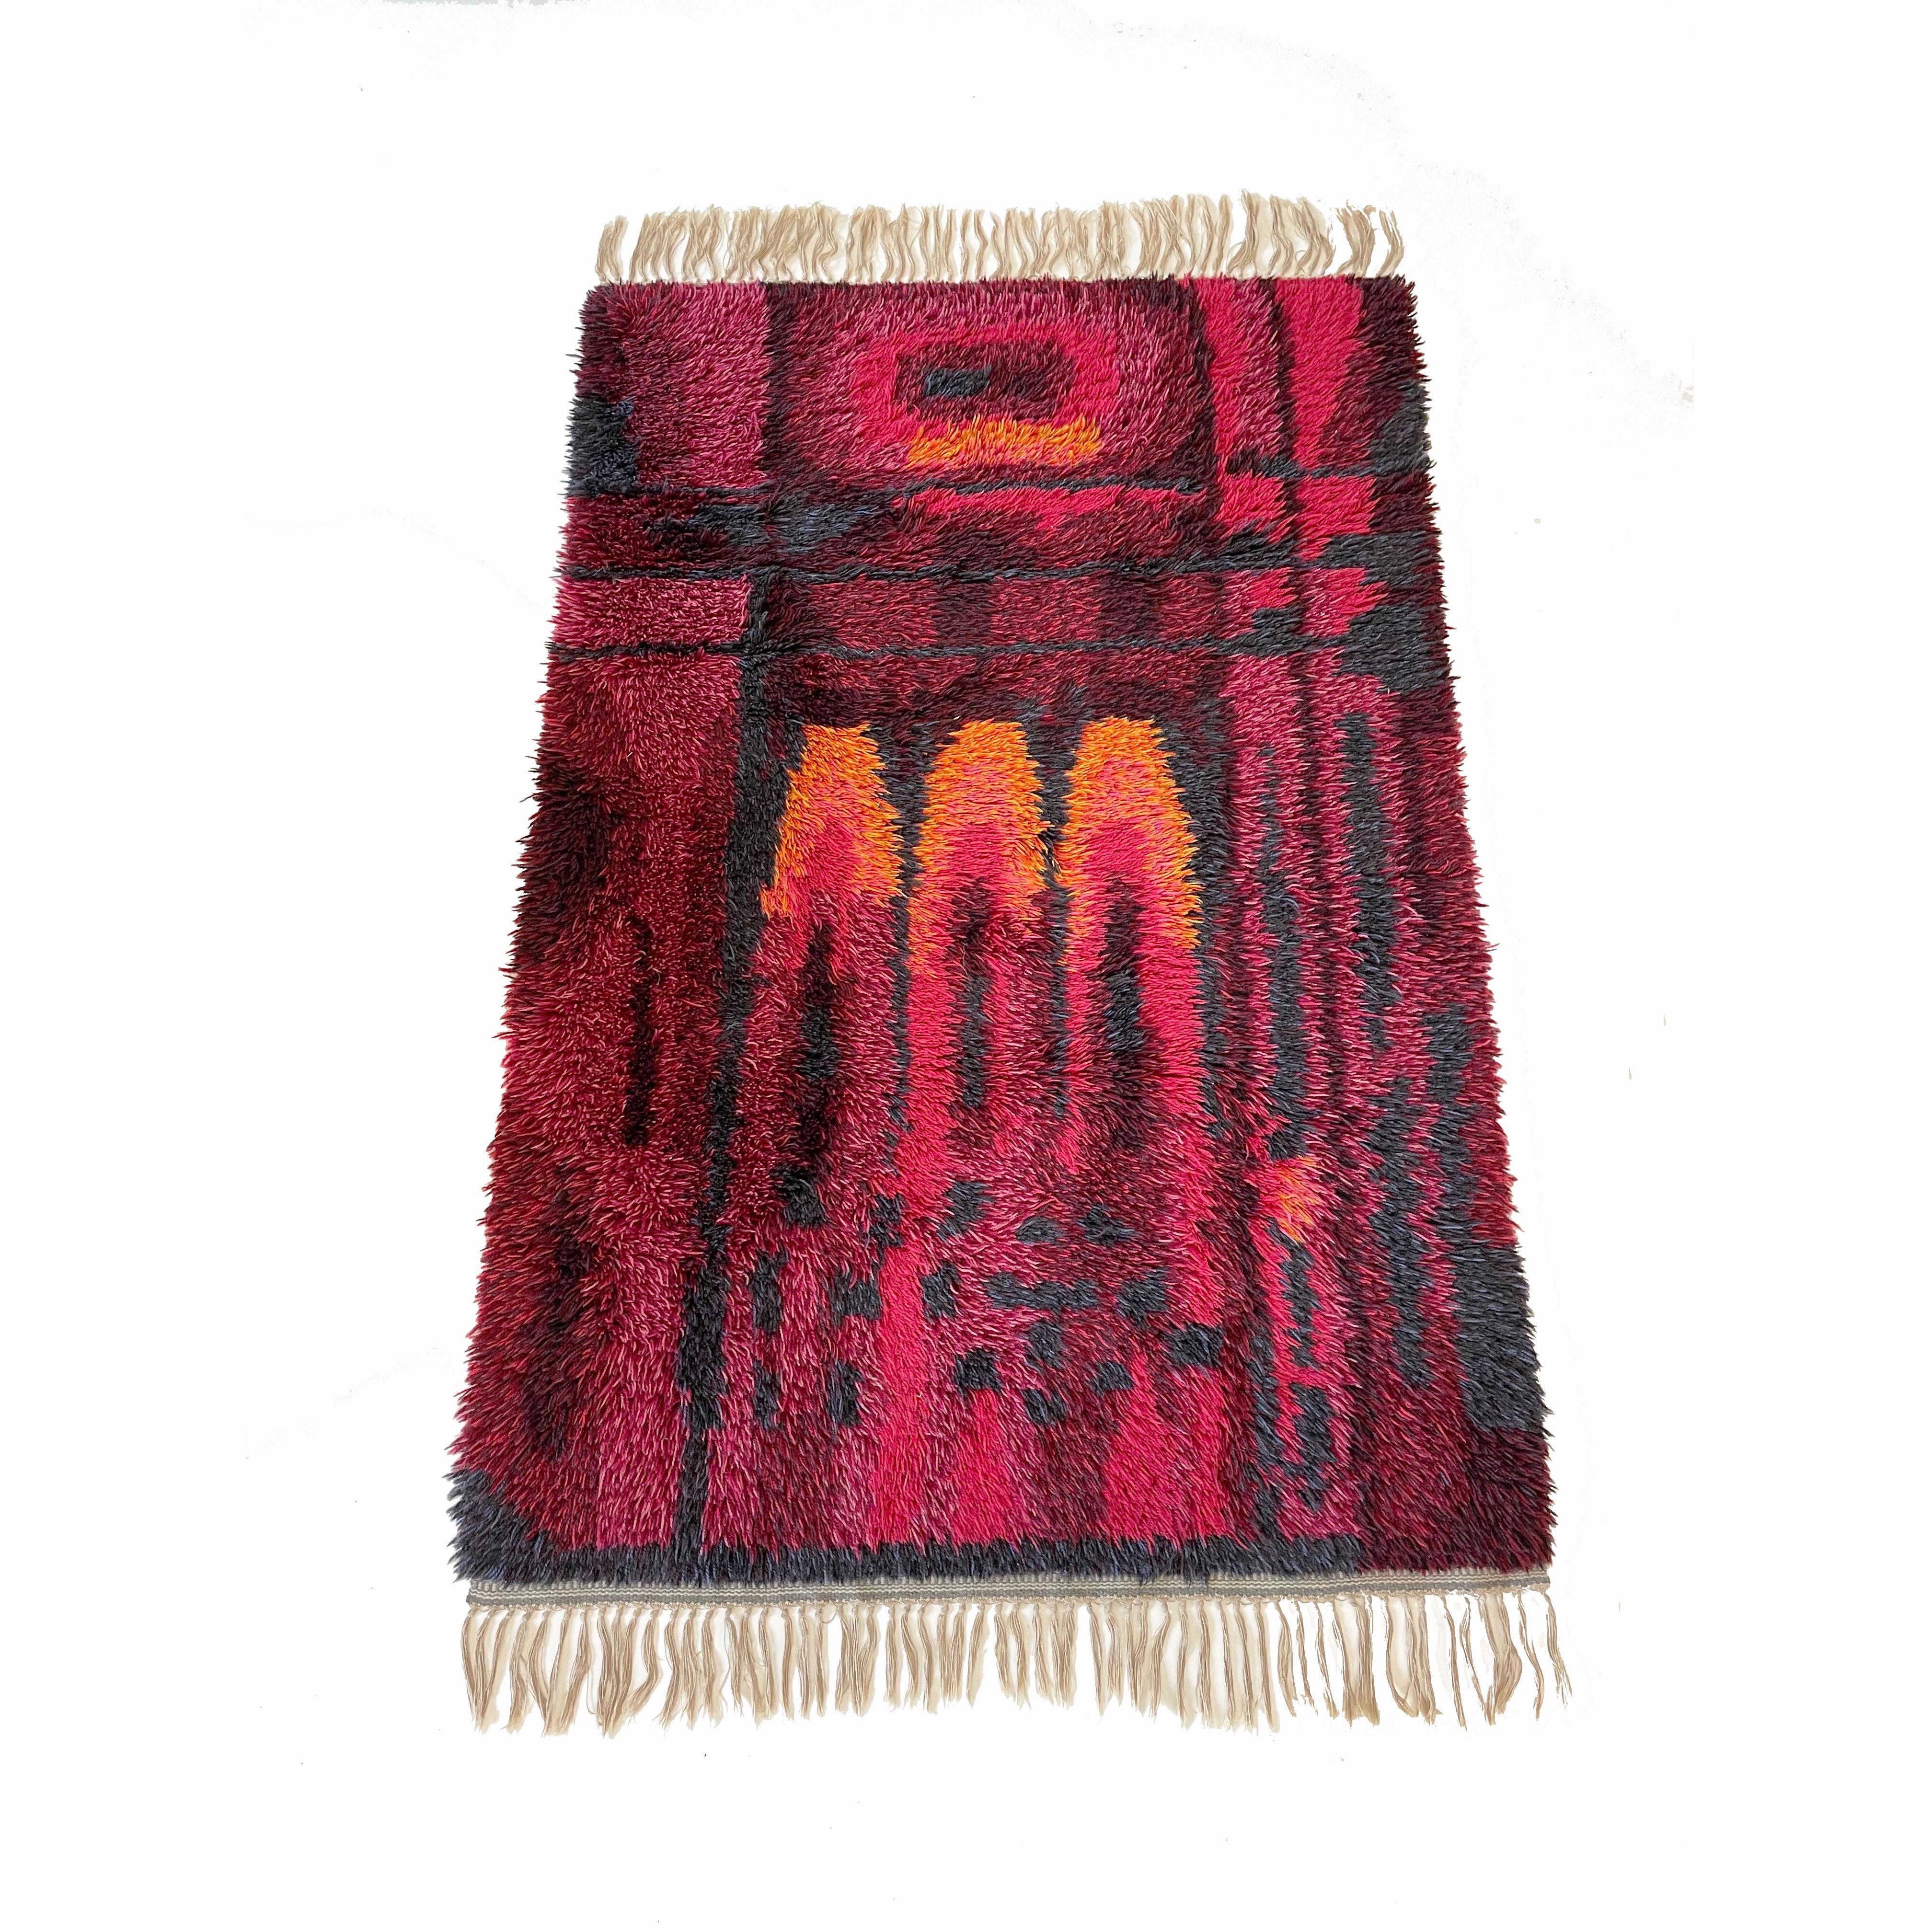 Article:

High pile Rya rug


Decade:

1960s


Origin:

Scandinavia, Sweden


Material:

100% wool



This rug is a great example of 1960s pop art interior. Made in high quality Rya weaving technique in Sweden in the 1960s, it